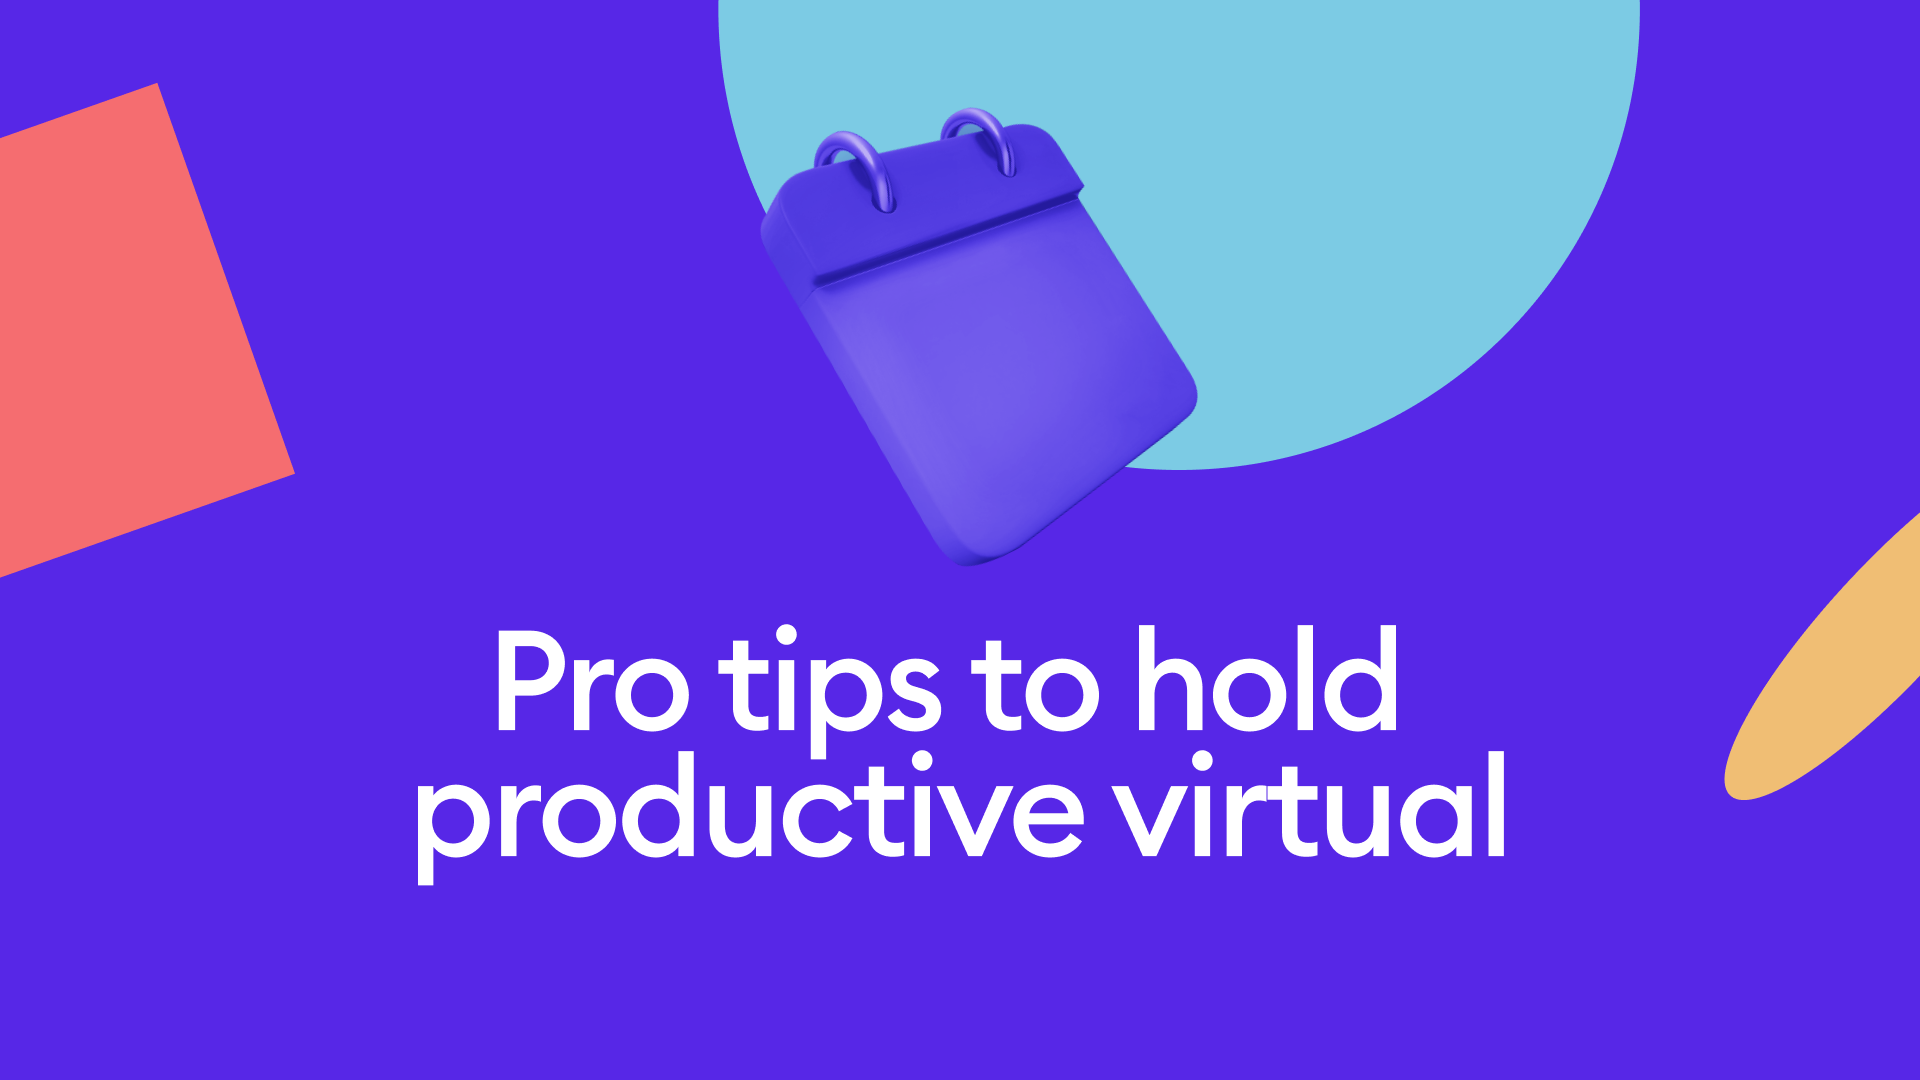 Pro tips to hold productive virtual 1:1s